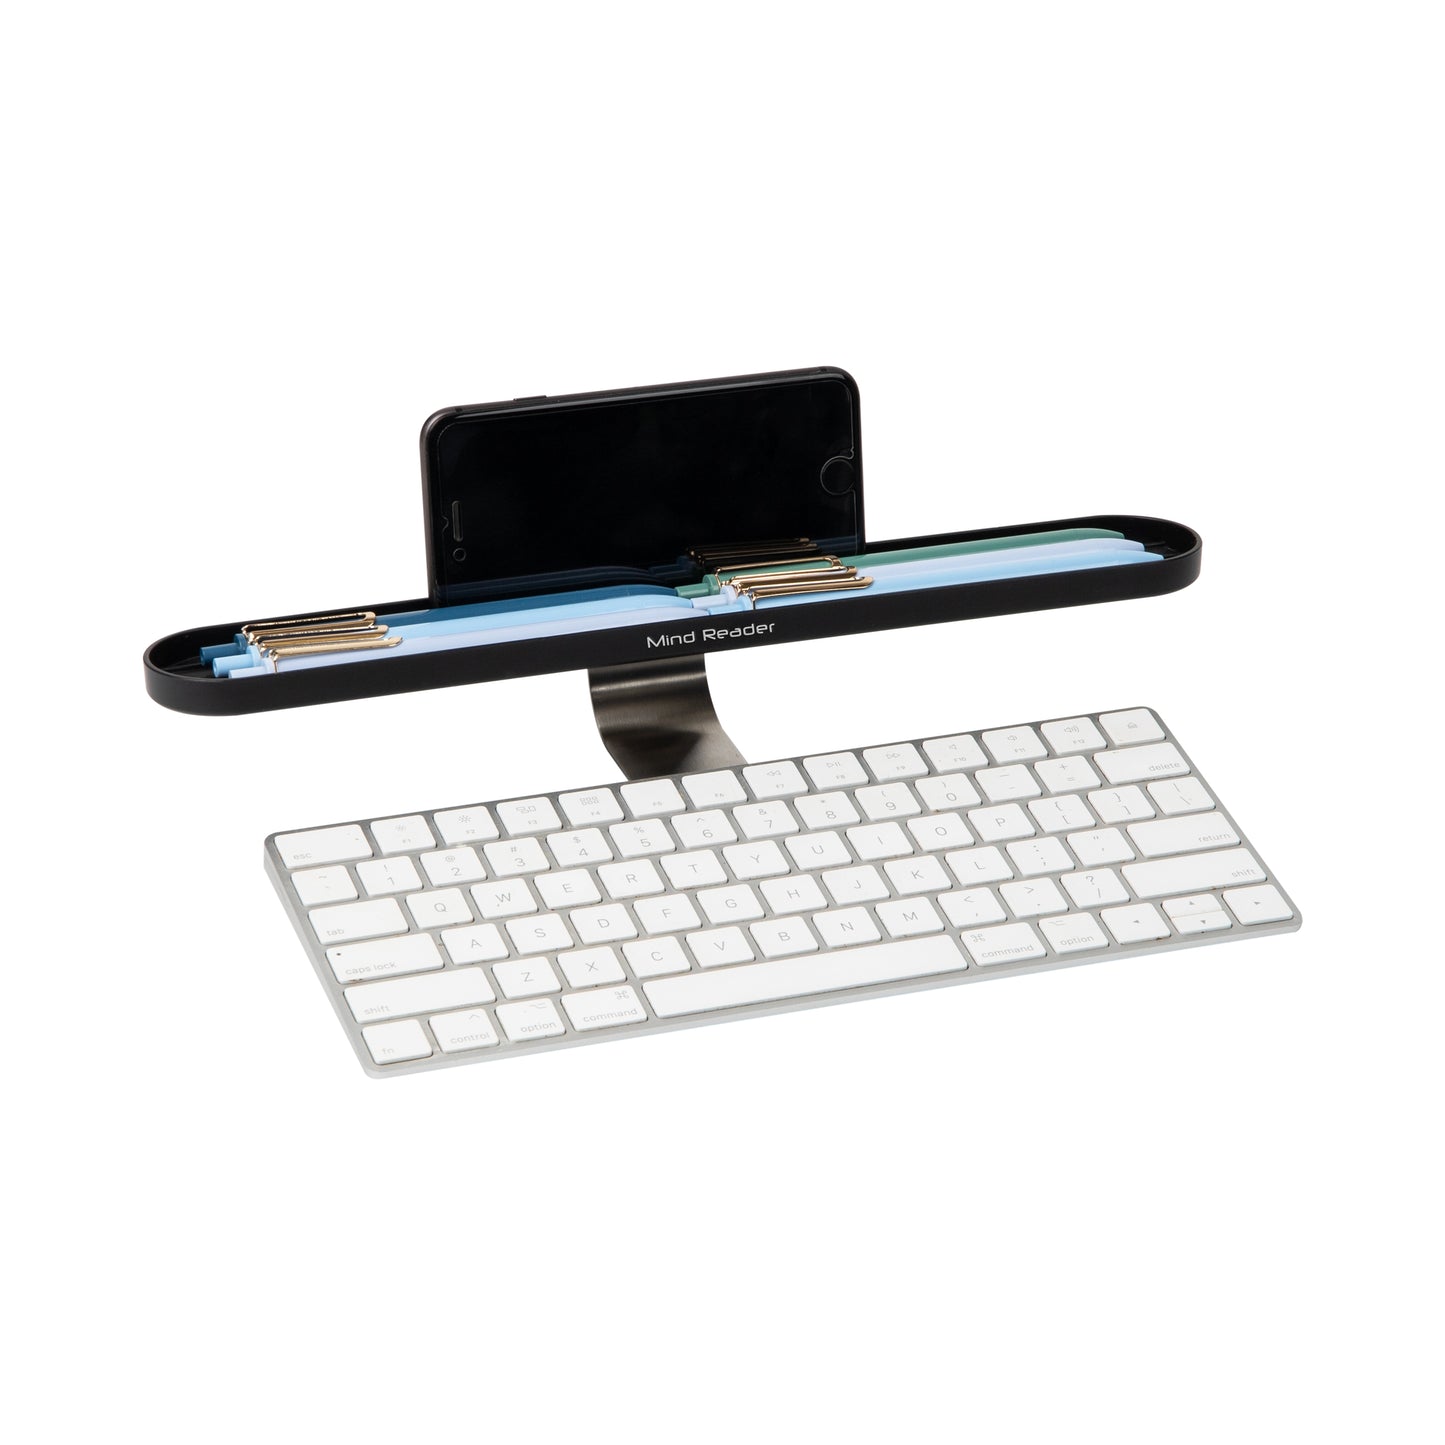 Mind Reader Anchor Collection, Over Keyboard Shelf for Cell Phone, Tablet, Pens and Accessories, Desktop Organizer, Black